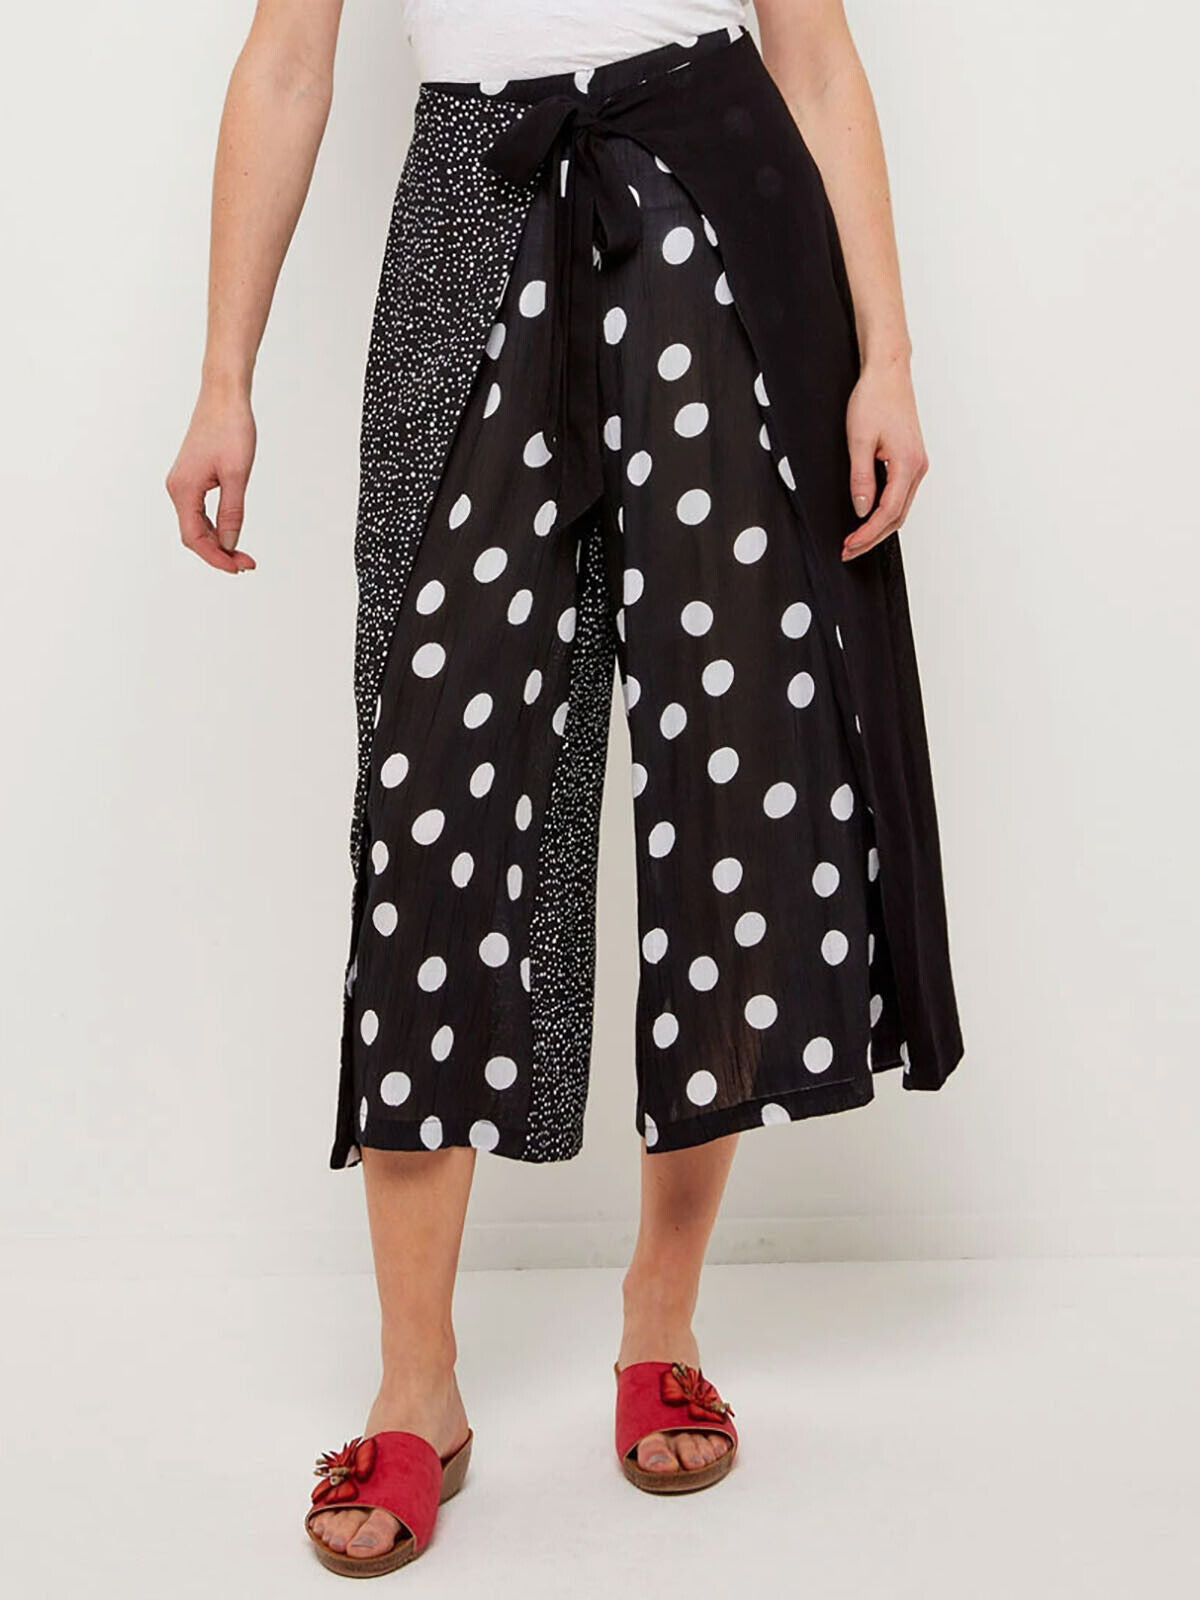 EX Joe Browns Navy Join The Dots Cropped Trousers Sizes 12, 14, 16